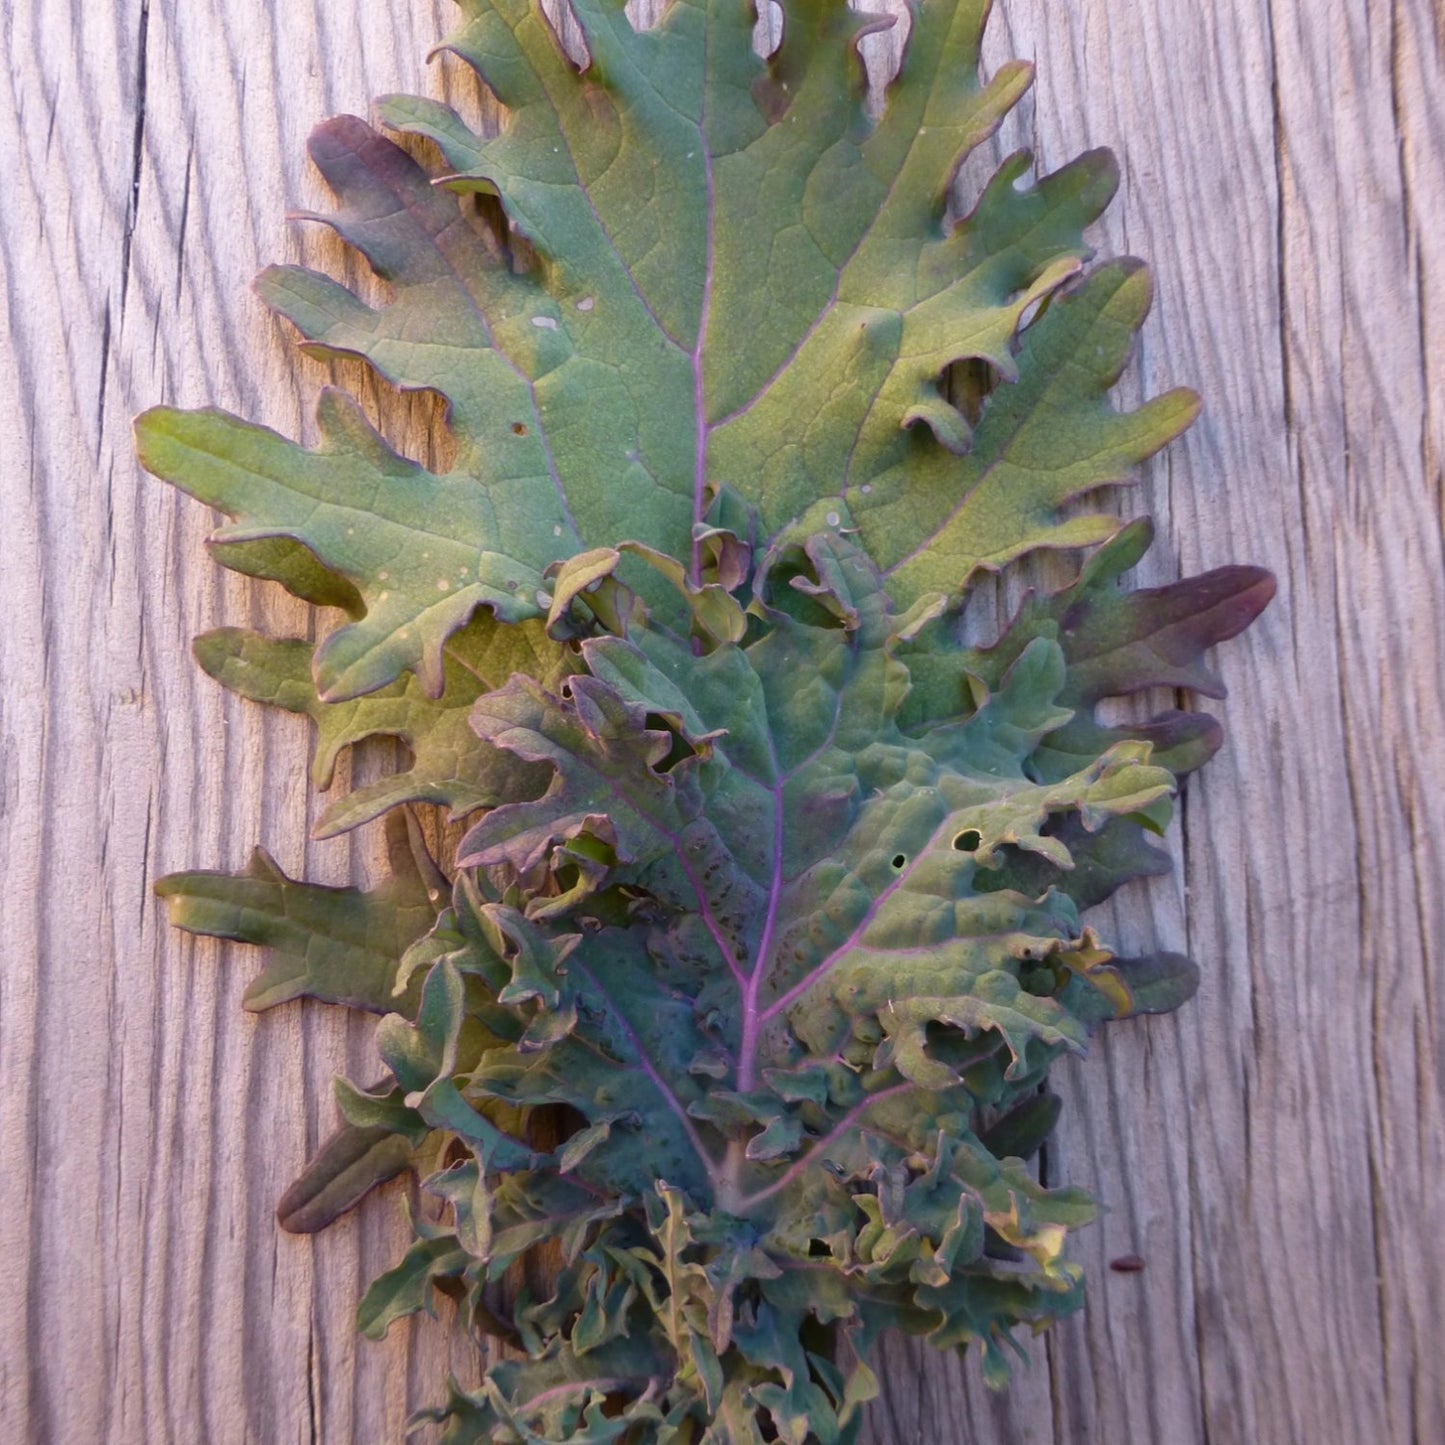 Red Russian Kale. Great for fall and winter gardens. Can withstand fall frosts  - makes a more tender, sweet, rich dark kale when cooked. also good raw. very disease resistant.